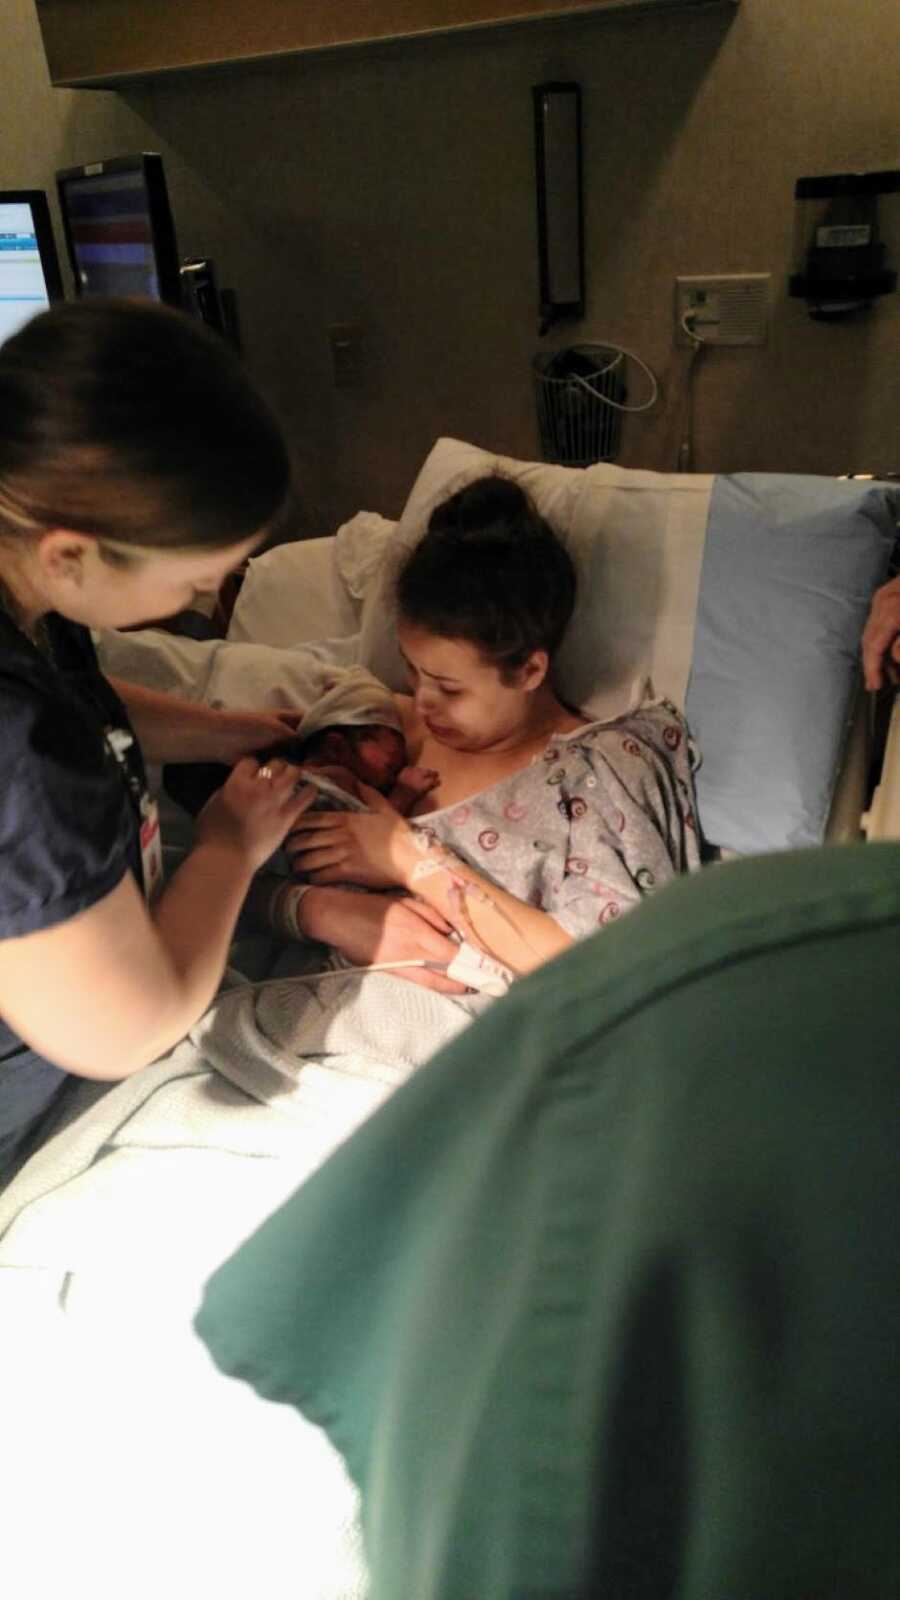 18-year-old cries while holding her newborn baby she's putting up for adoption after 36 hours of labor